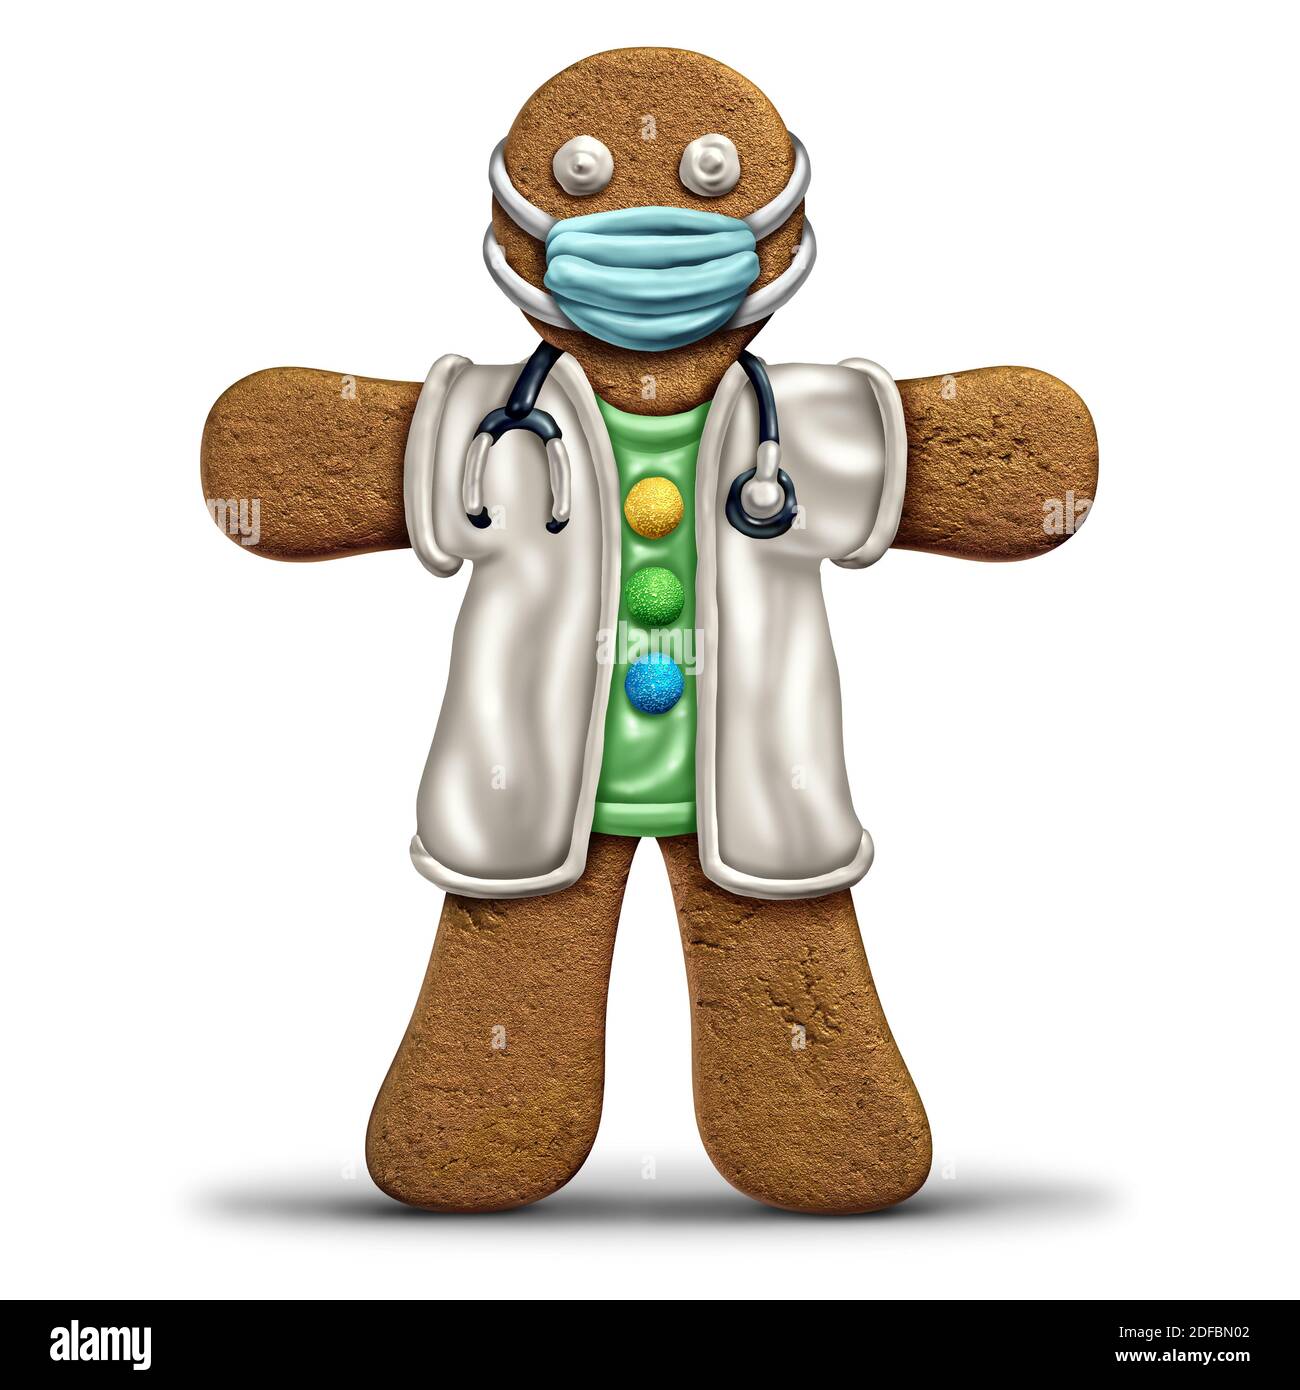 Gingerbread man doctor and health worker icon with a face mask for health and healthcare essential worker hero bake sale and preventing a virus. Stock Photo